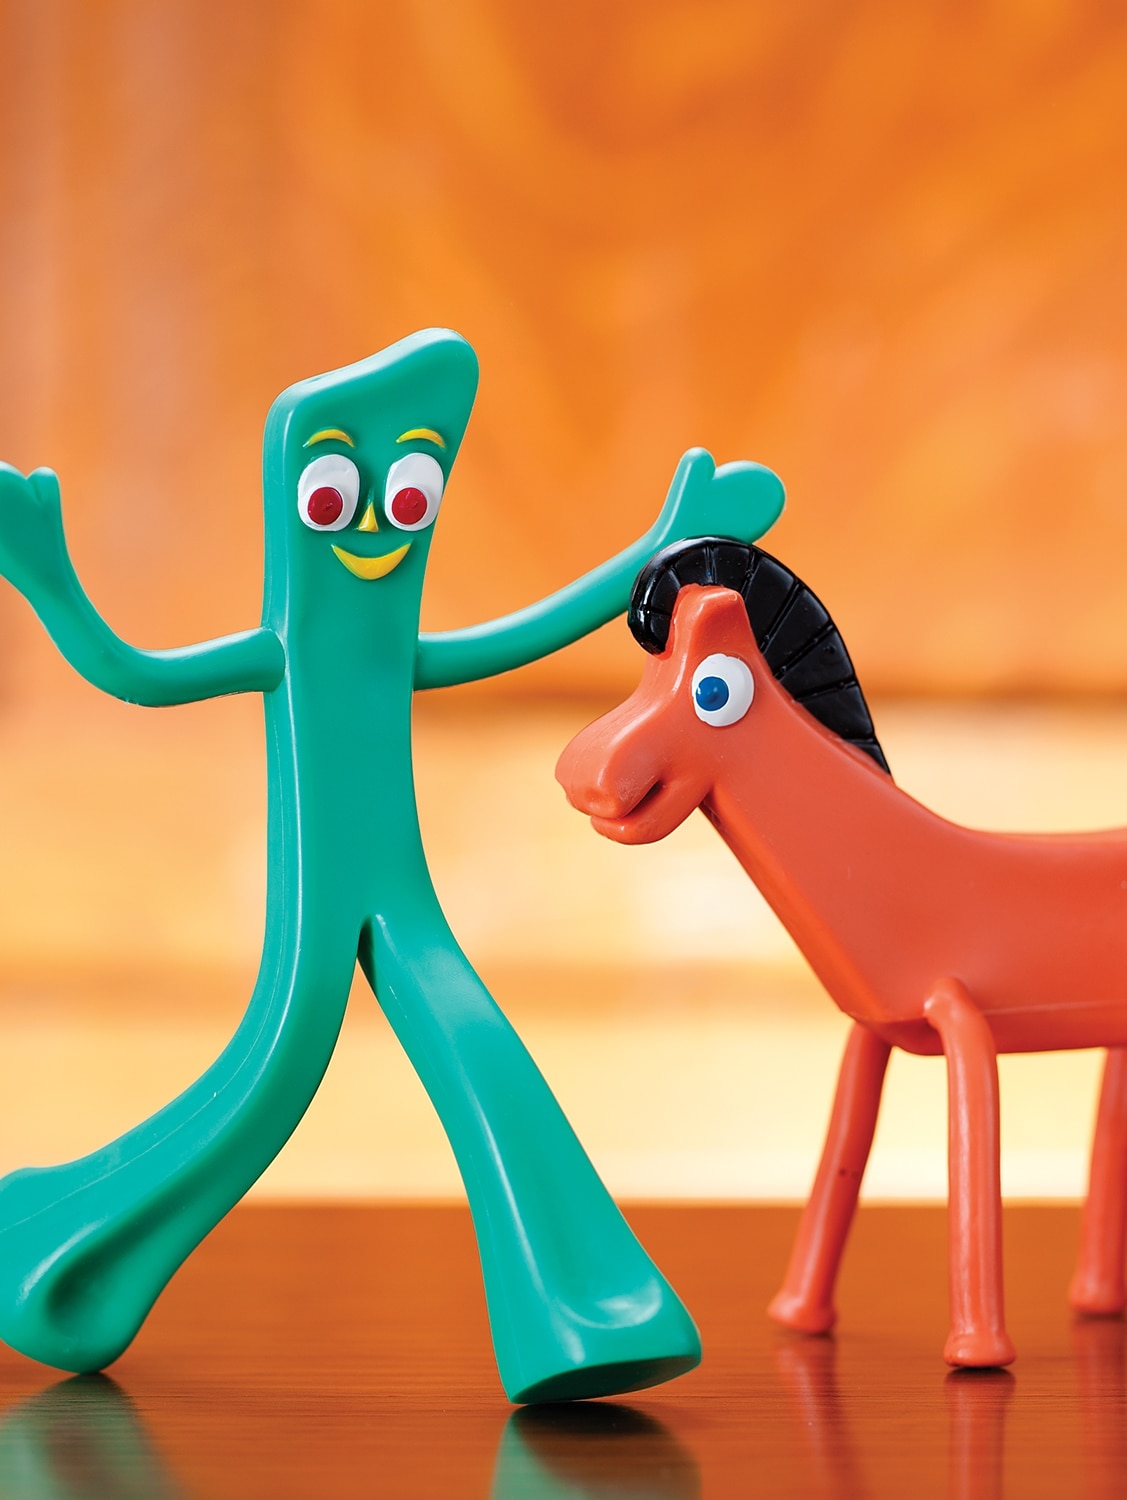 Vintage Original Gumby And Friends Pokey Bendable Set Toy Kids Children Fig...